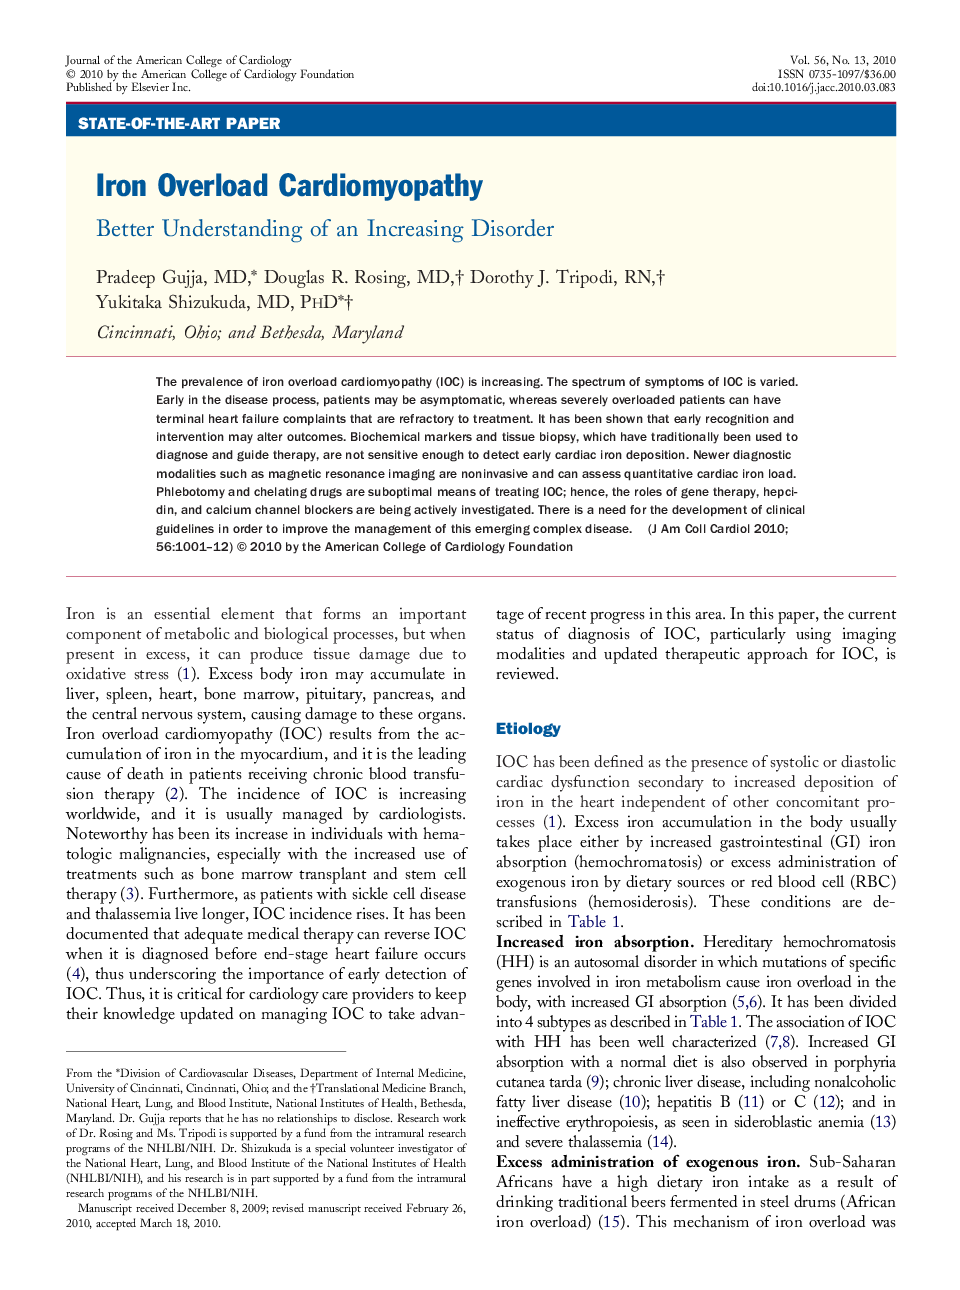 Iron Overload Cardiomyopathy : Better Understanding of an Increasing Disorder